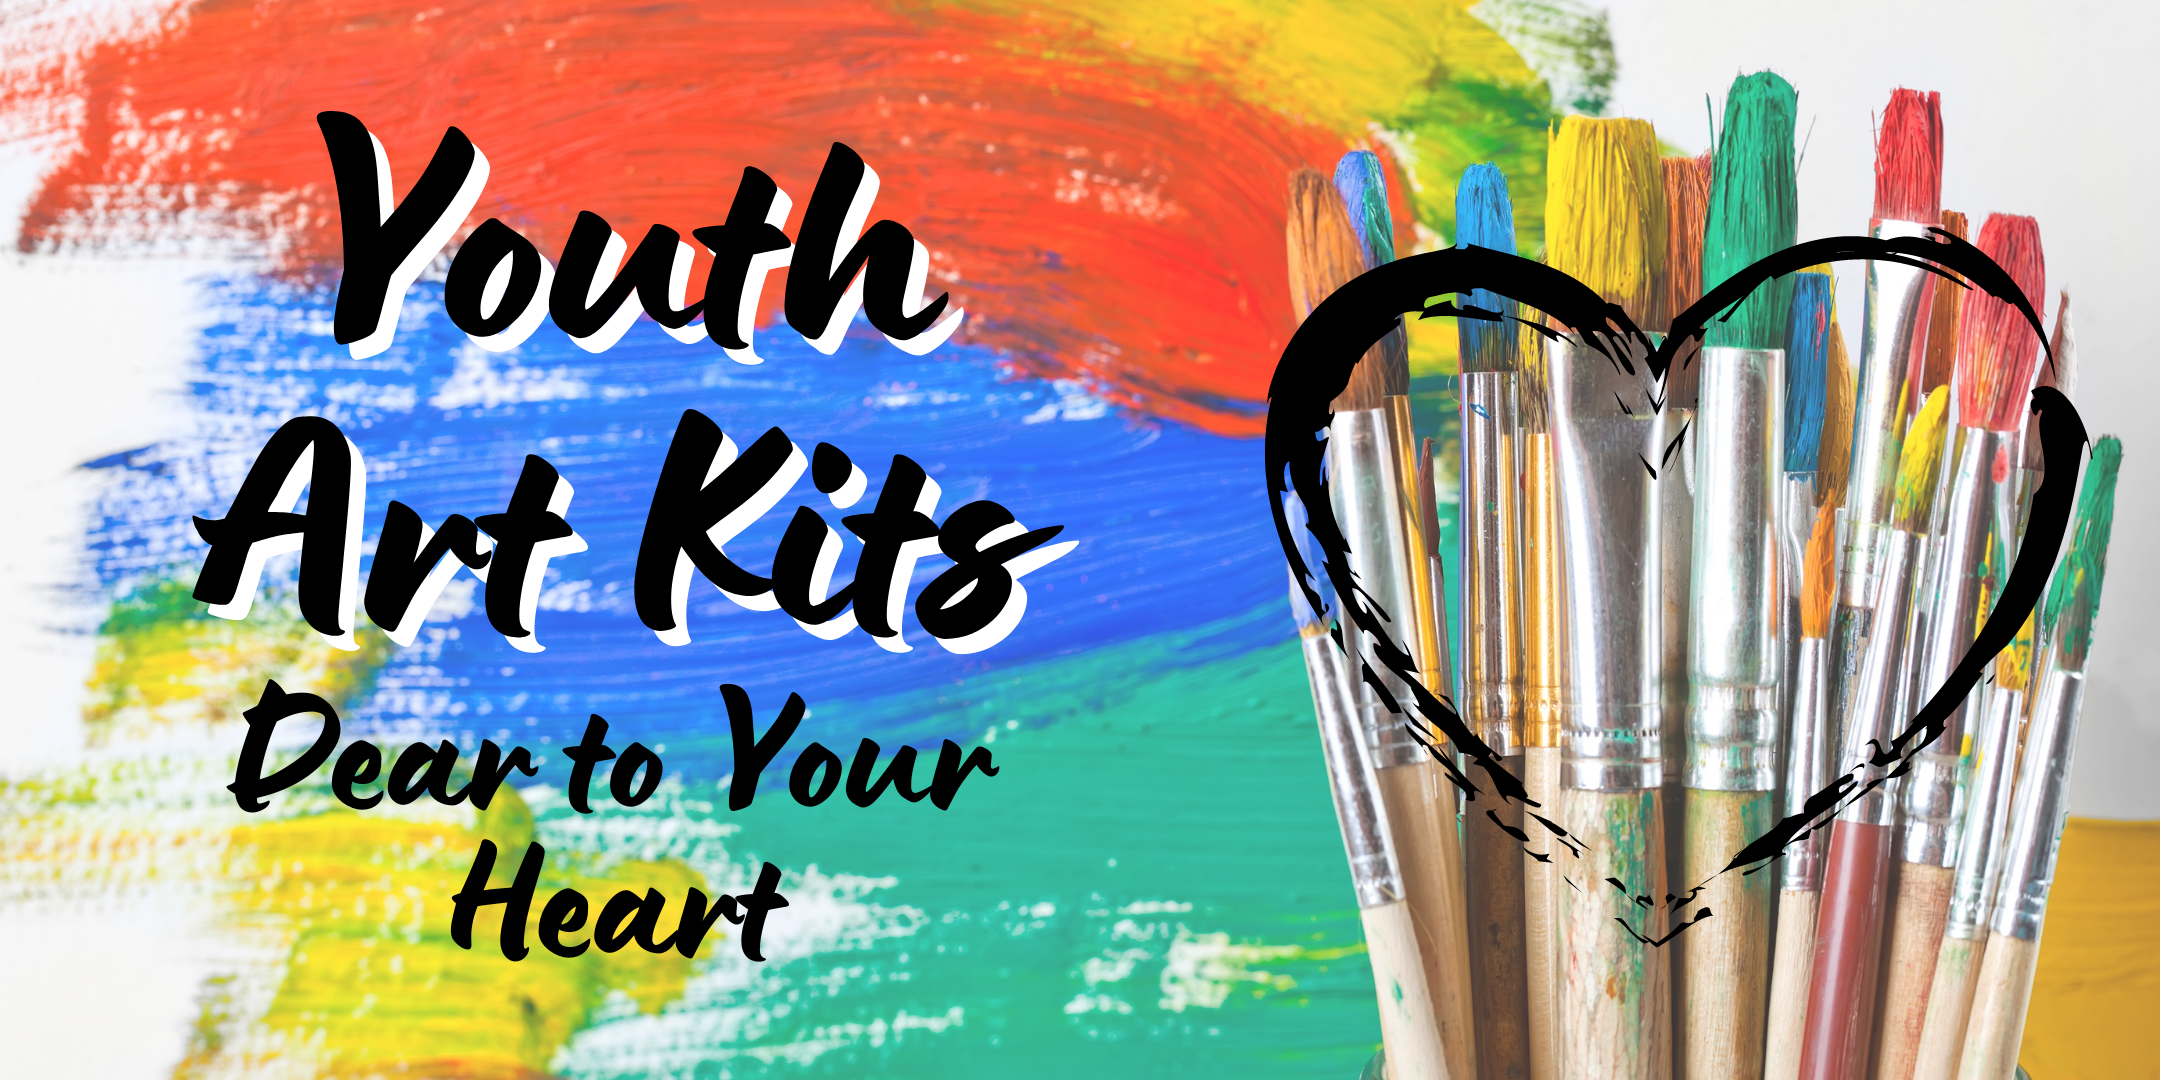 Youth Art Kits: Dear to Your Heart event image with colorful paint and paintbrushes in the background